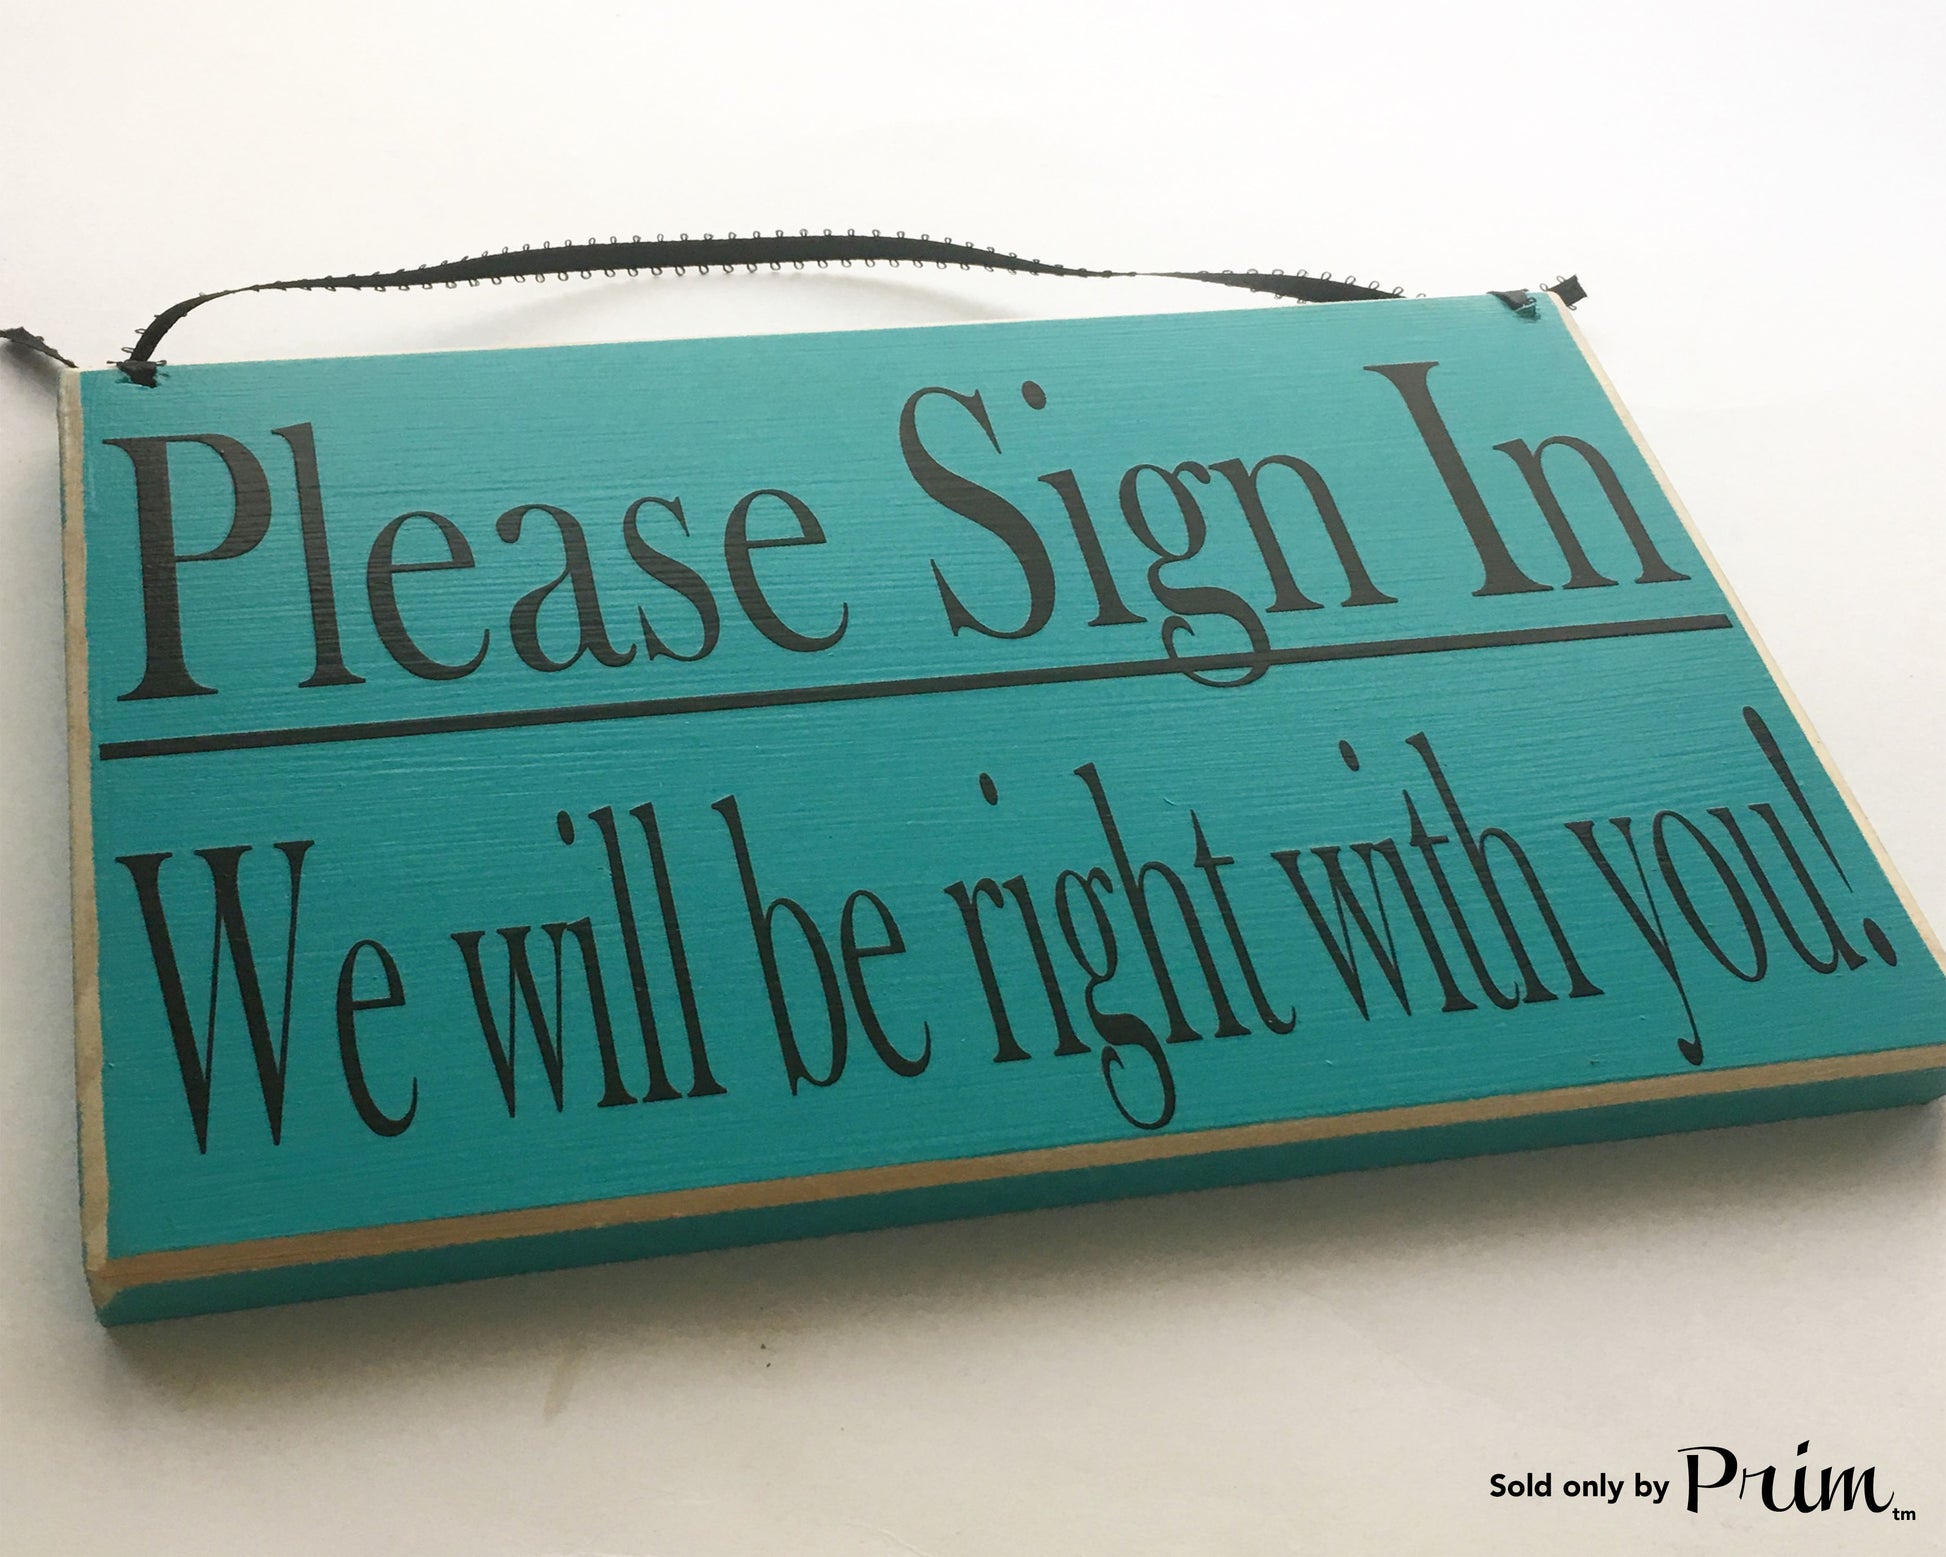 10x8 Please Sign In We Will Be Right With You Custom Wood Sign Salon Spa Office Welcome Please Have a Seat In Session Door Plaque